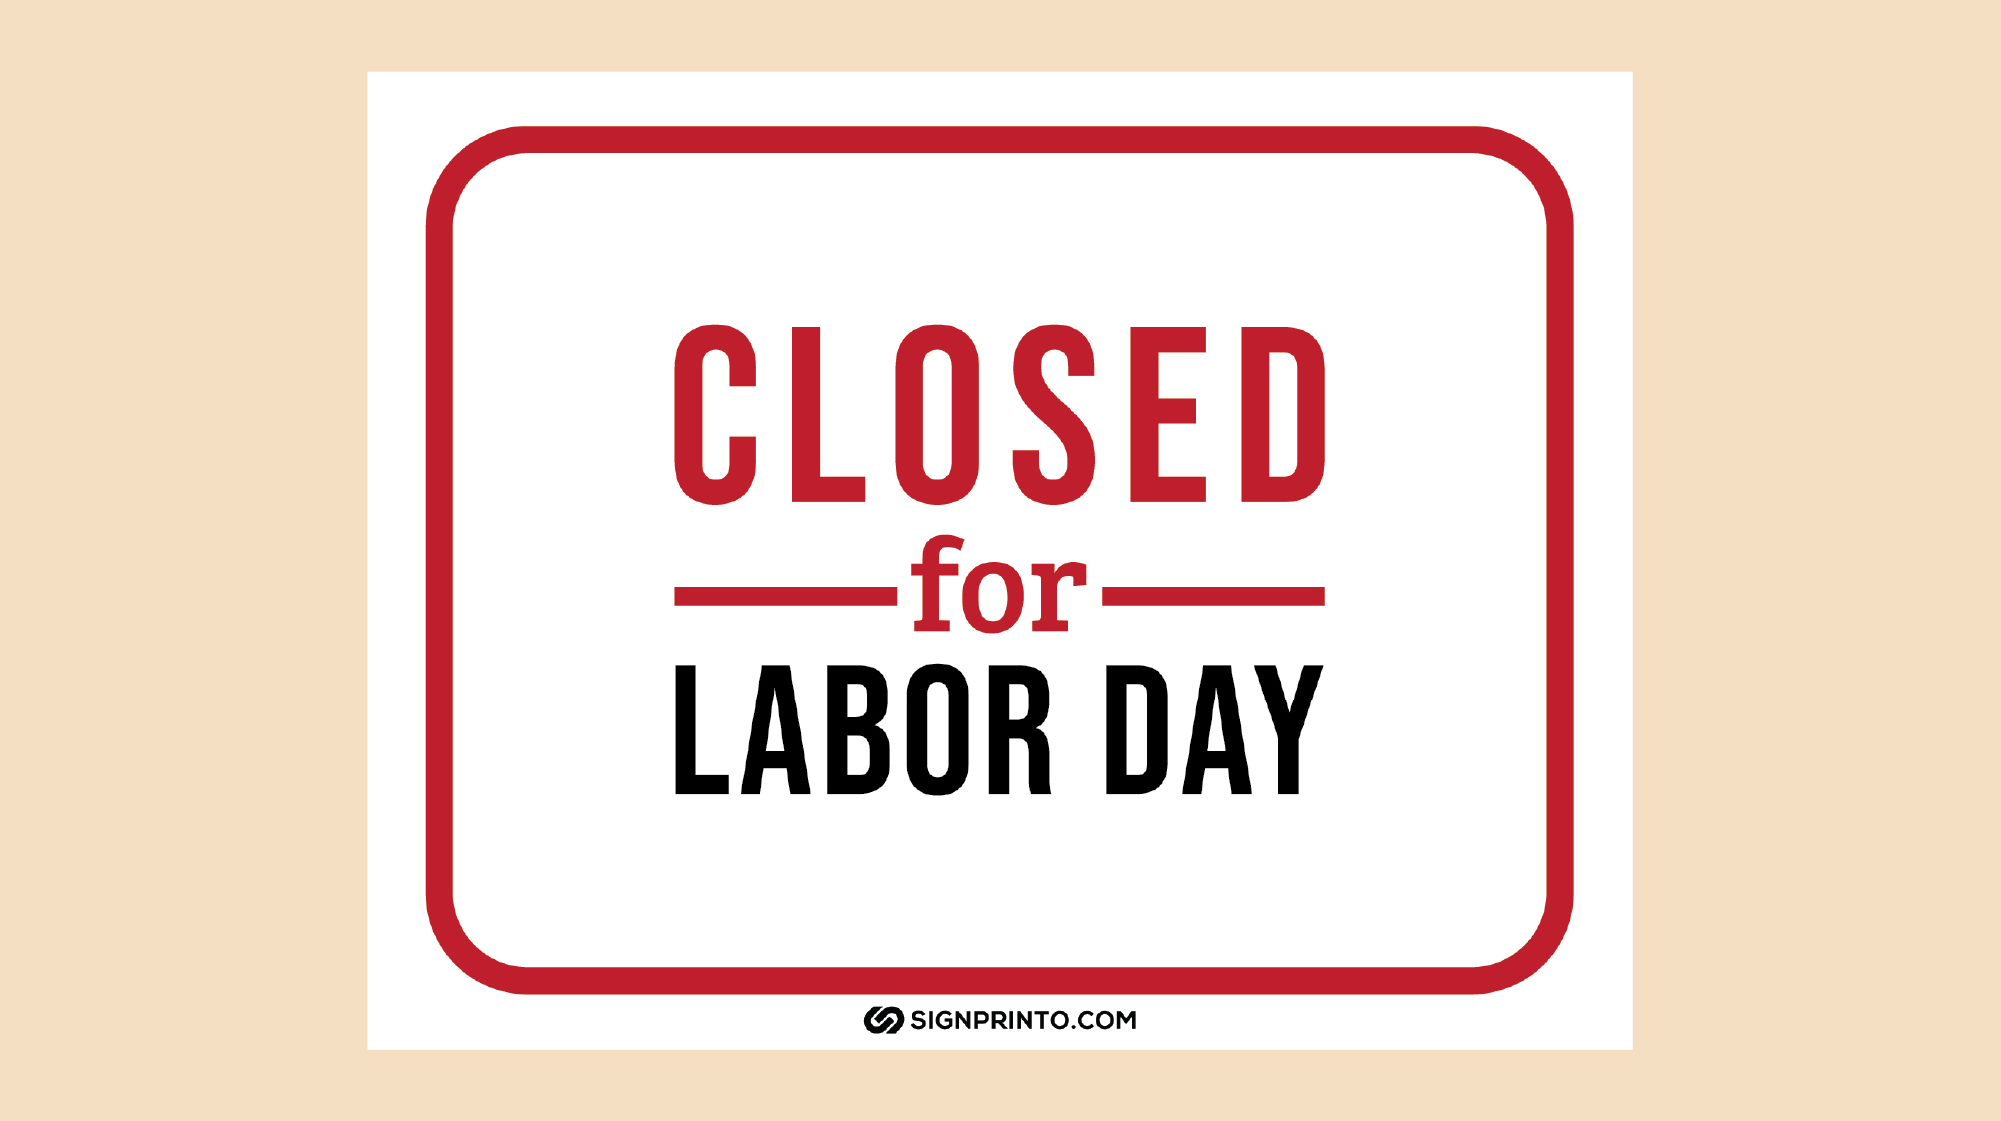 Closed For Labor day - Labor Day closed sign